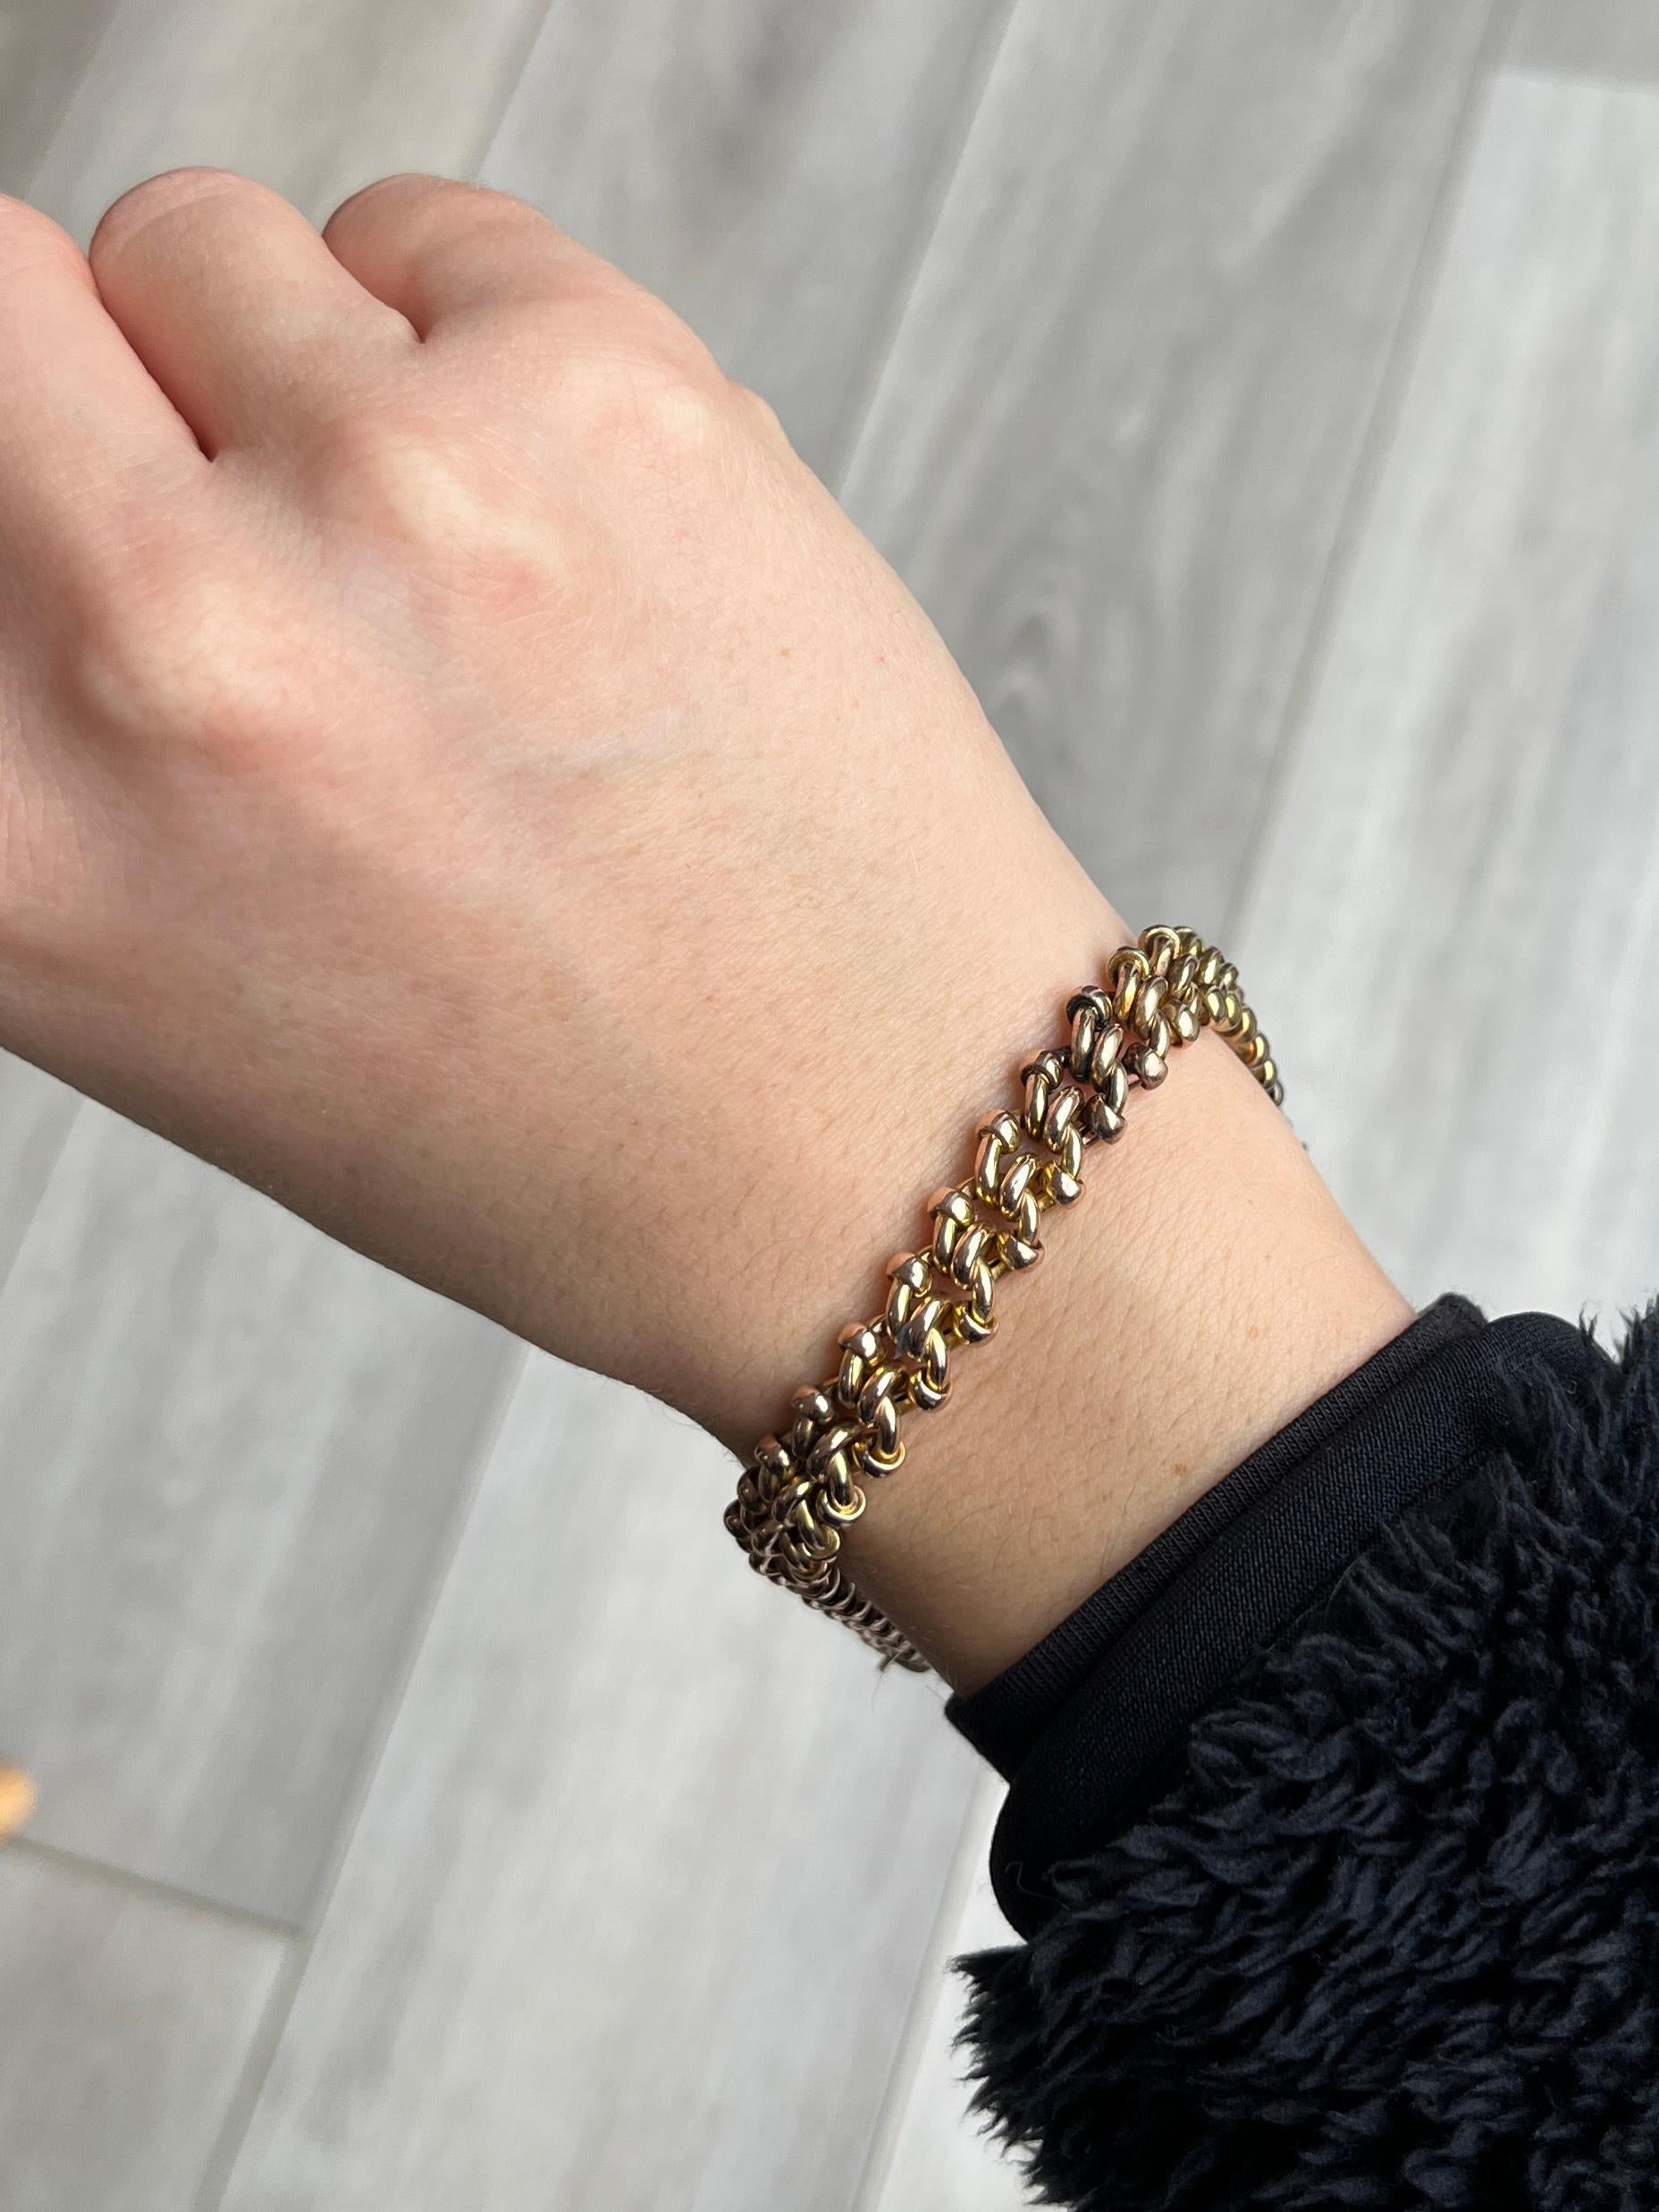 This bracelet is modelled in hollow 9ct yellow gold, which makes the bracelet light weight and comfortable to wear. 

Length: 17cm
Width: 9mm

Weight: 15.9g

